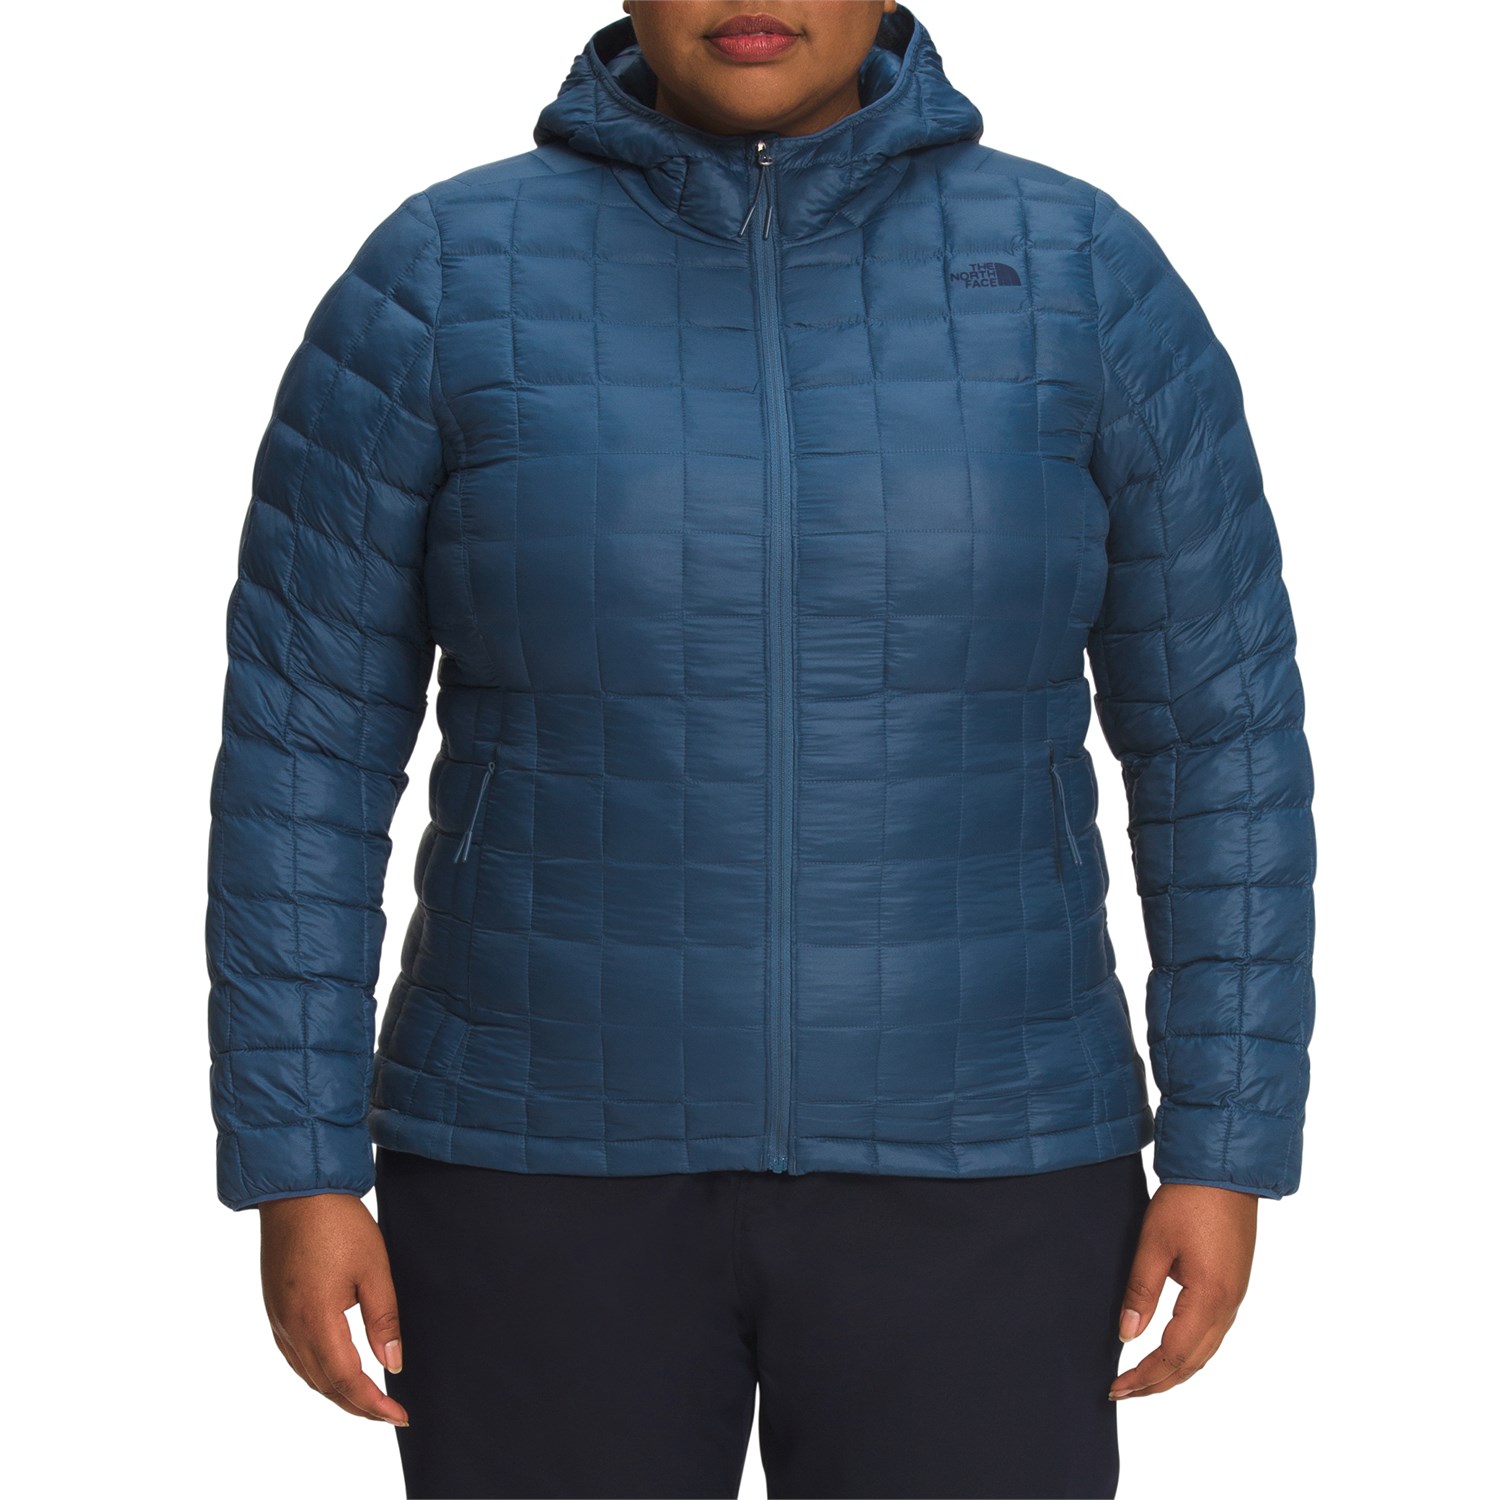 Худи The North Face ThermoBall Eco 2.0 Plus, цвет Shady Blue куртка the north face thermoball eco 2 0 plus цвет shady blue